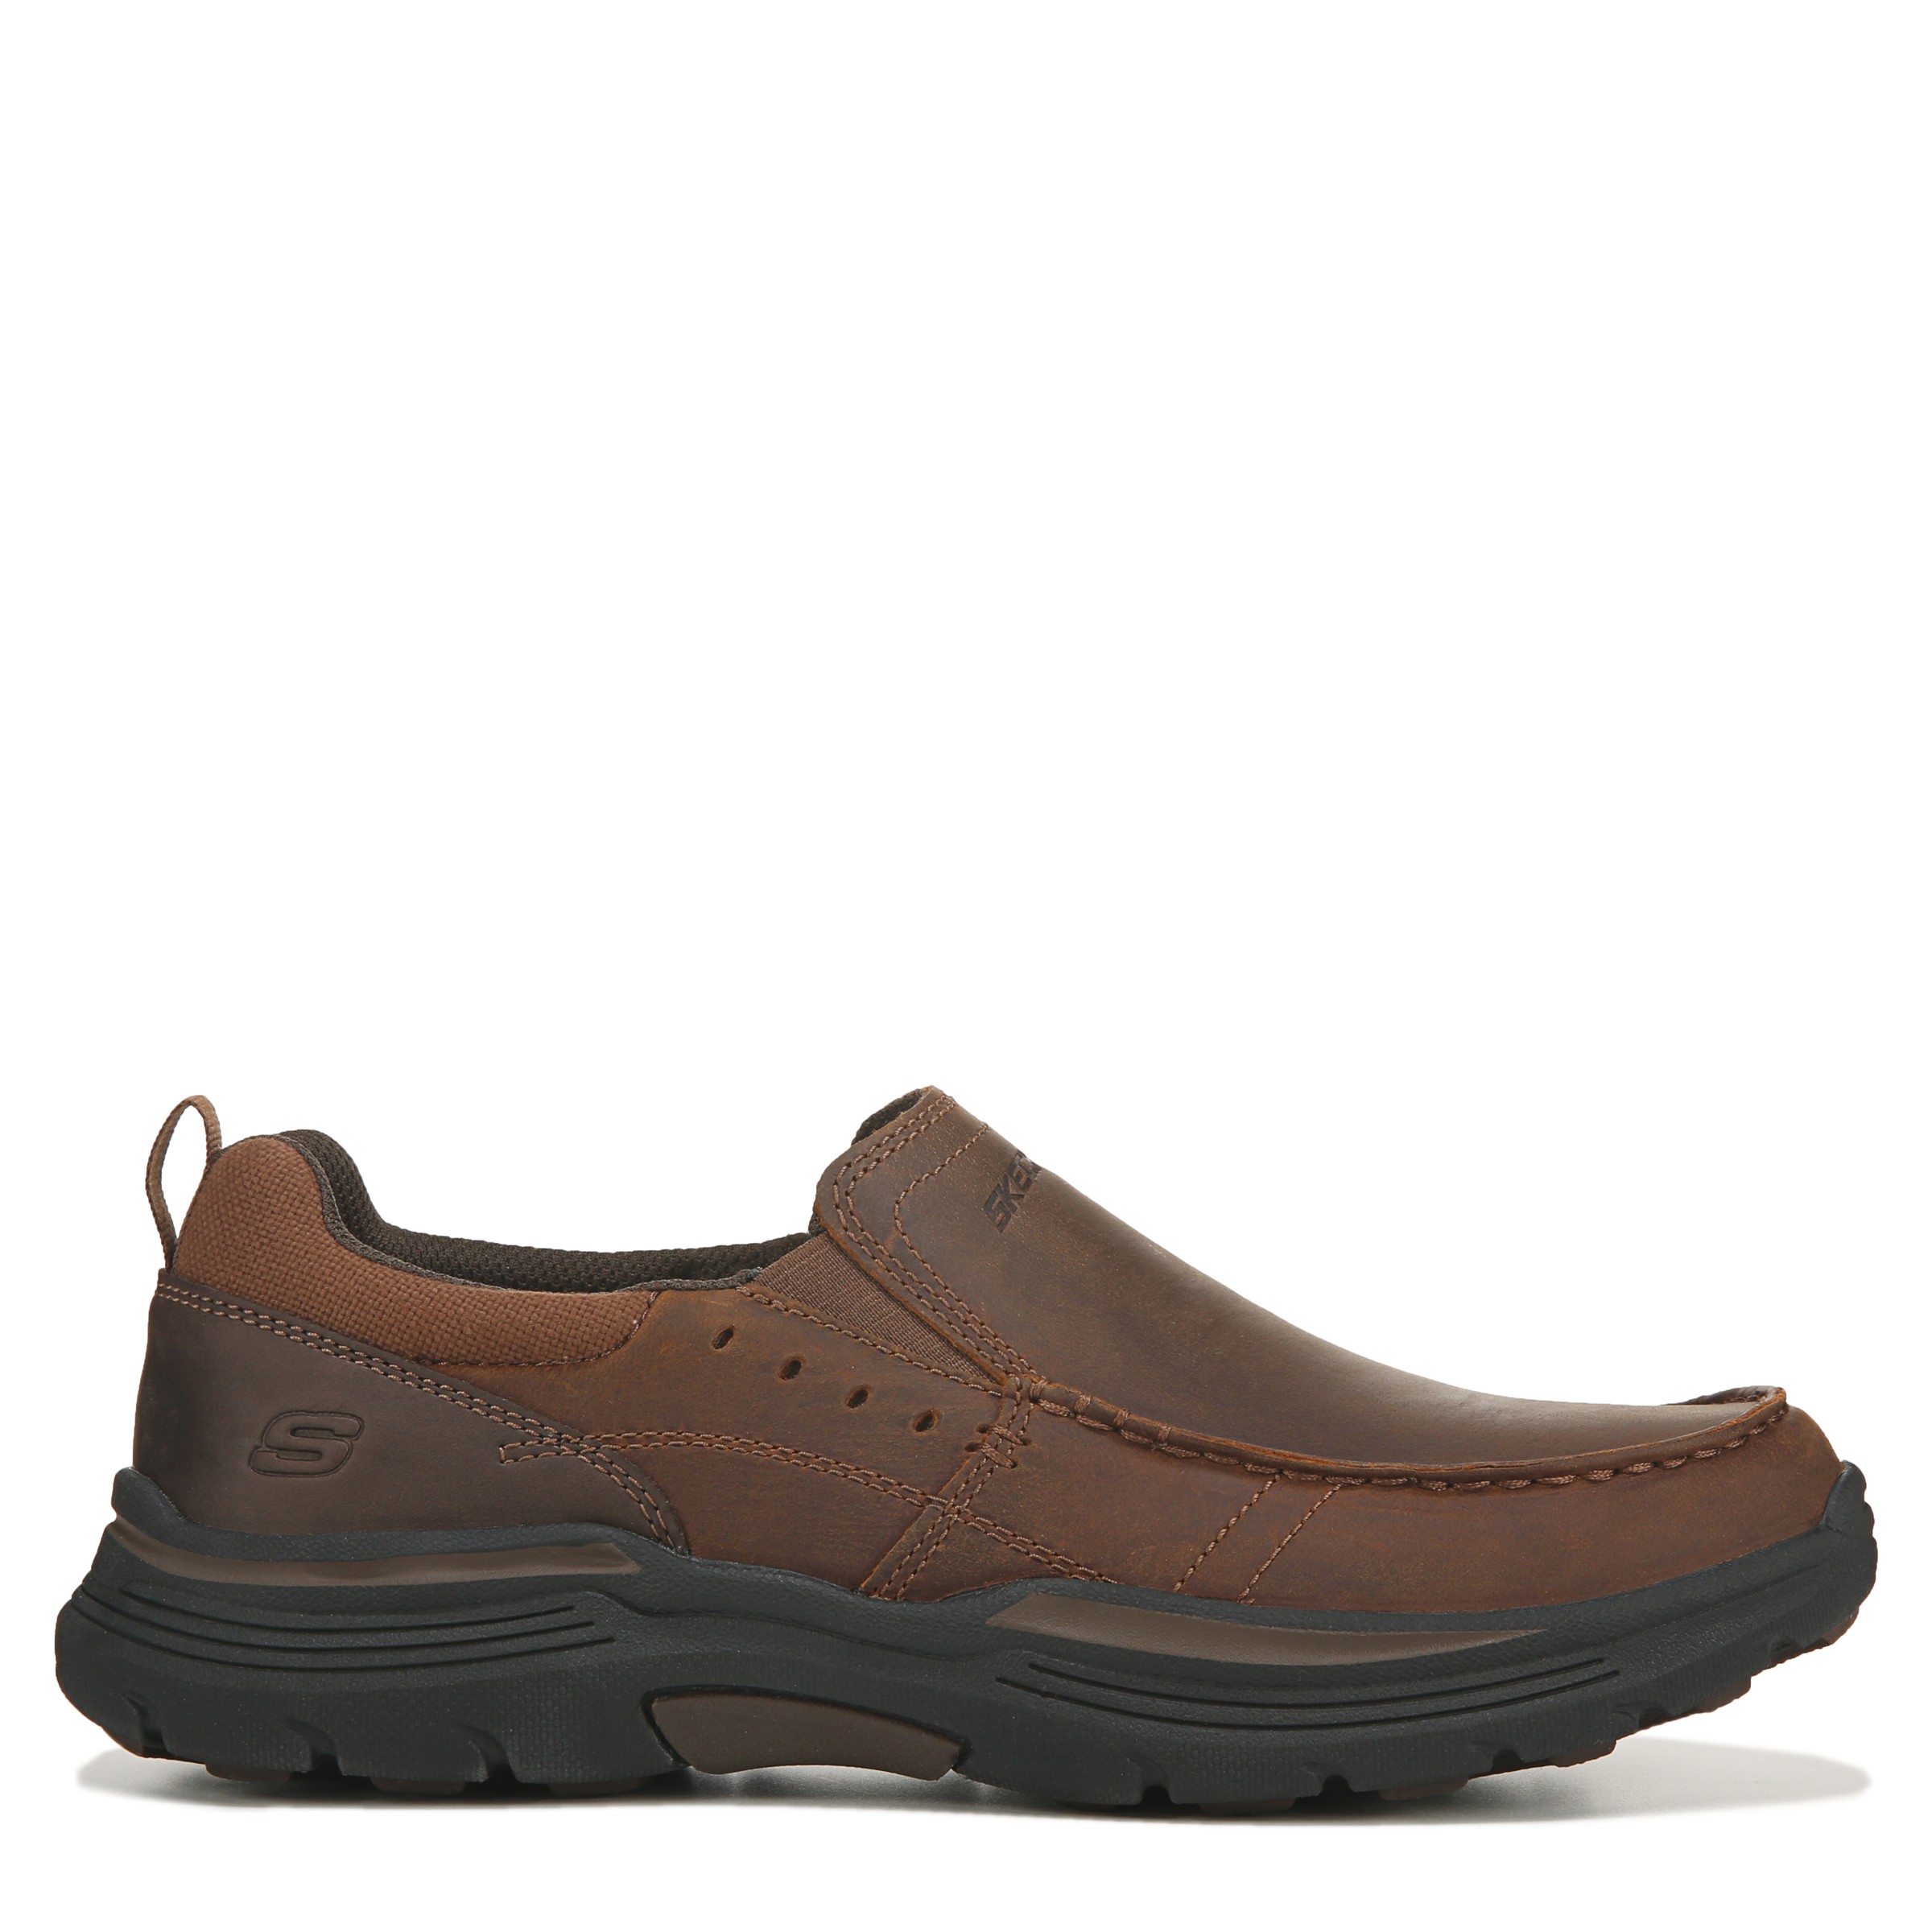 Skechers Men's Seveno Leather Slip On, Loafers and Oxfords 